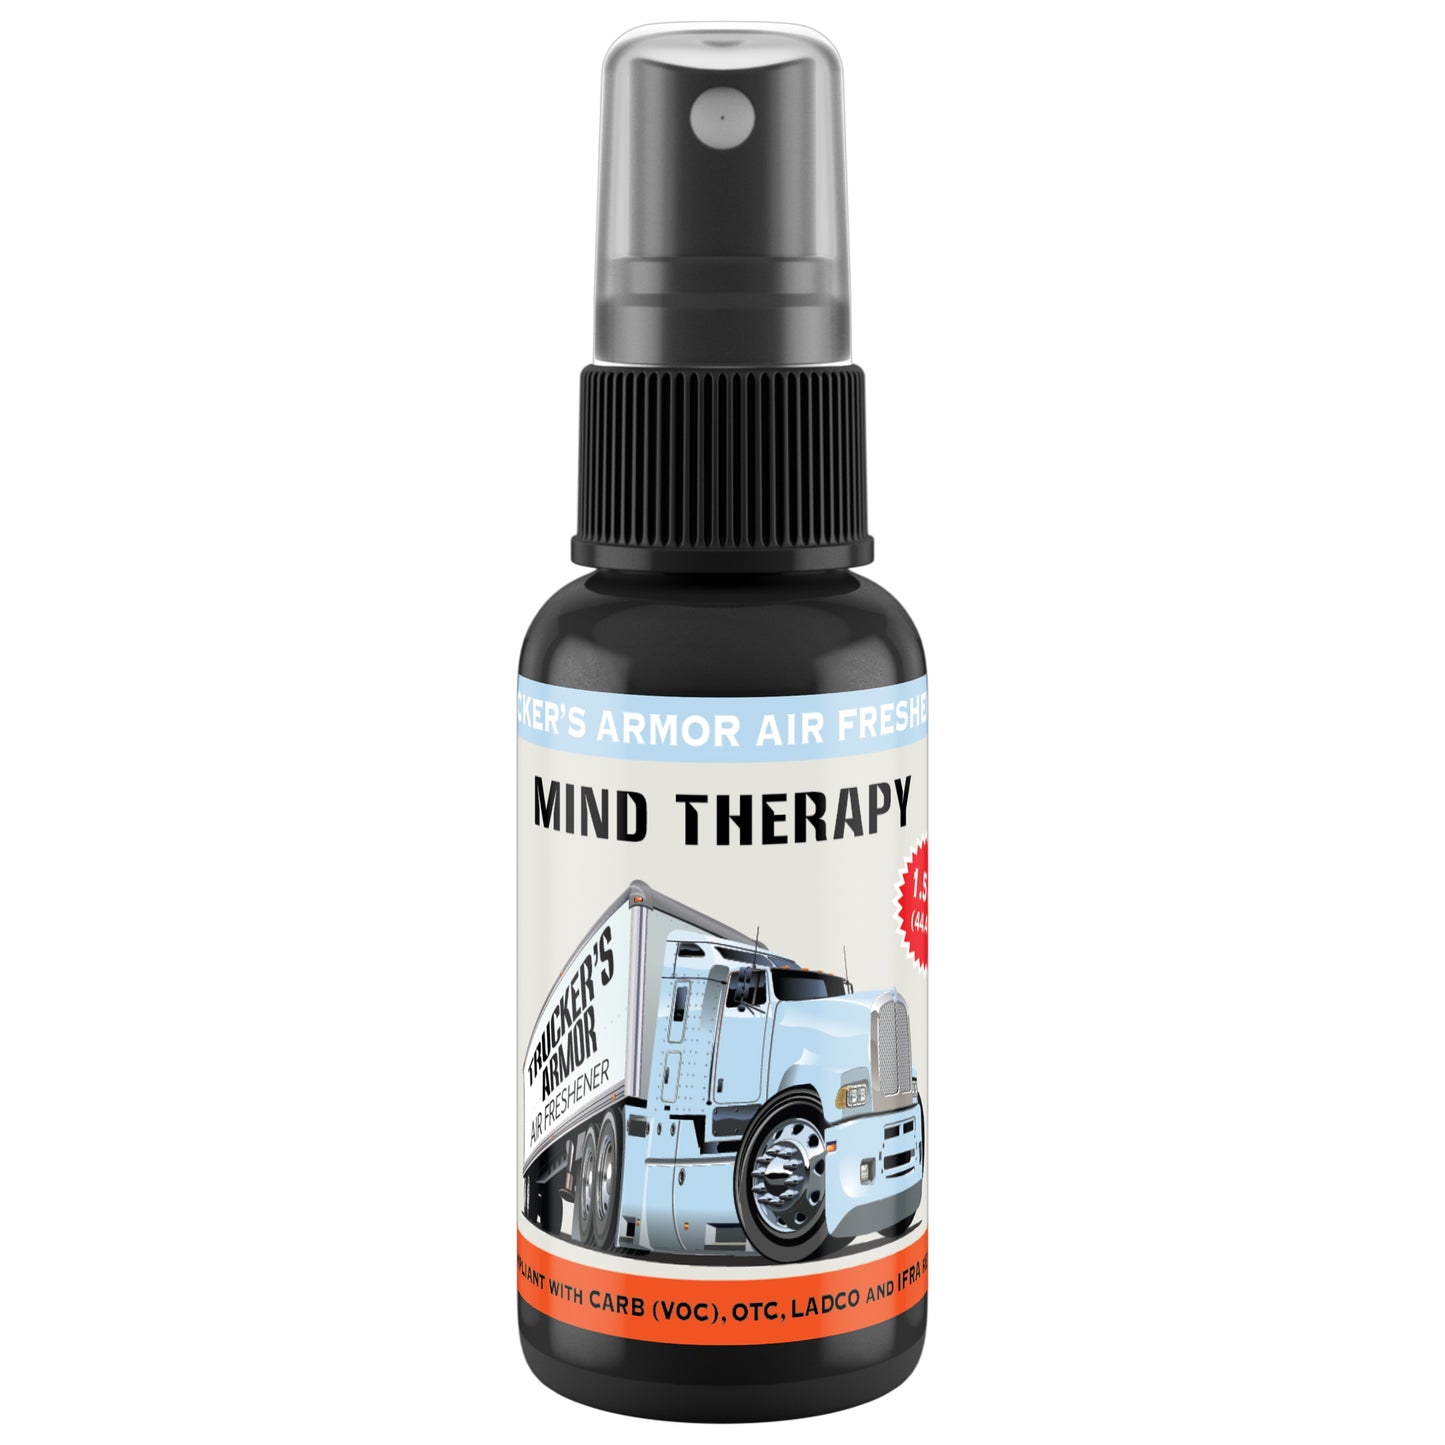 Trucker's Armor Air Freshener - Mind Therapy Scent